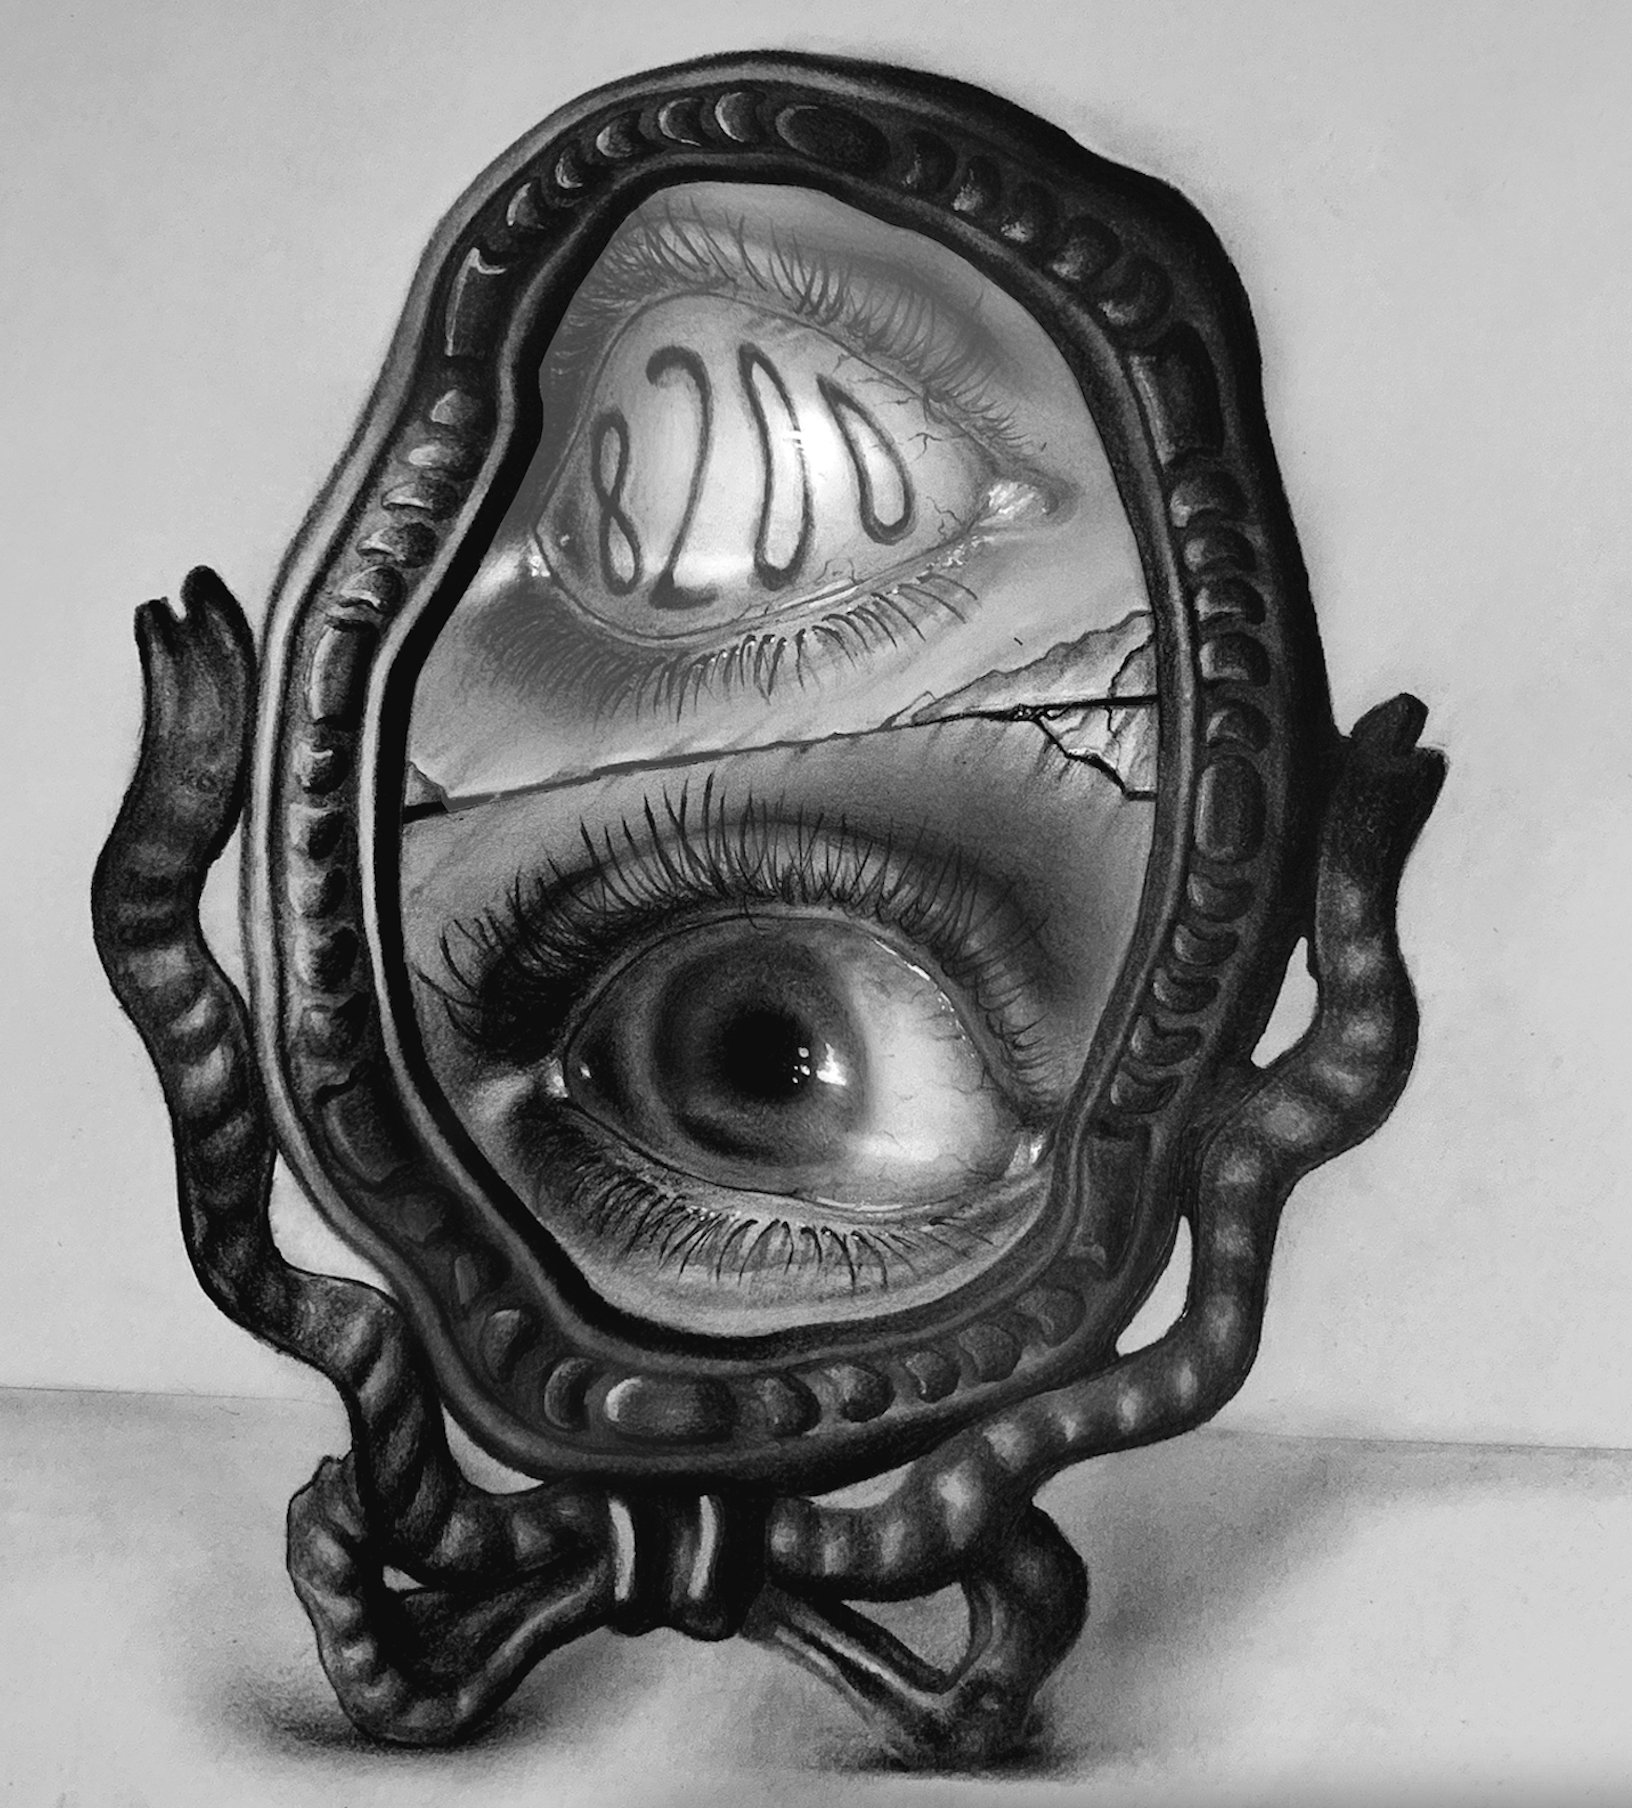 A drawing demonstrating the impact of COVID-19 on dreams. It depicts a melting mirror reflecting eyes expressing anxiety. The drawing is created with graphite, charcoal and acrylic white paint.